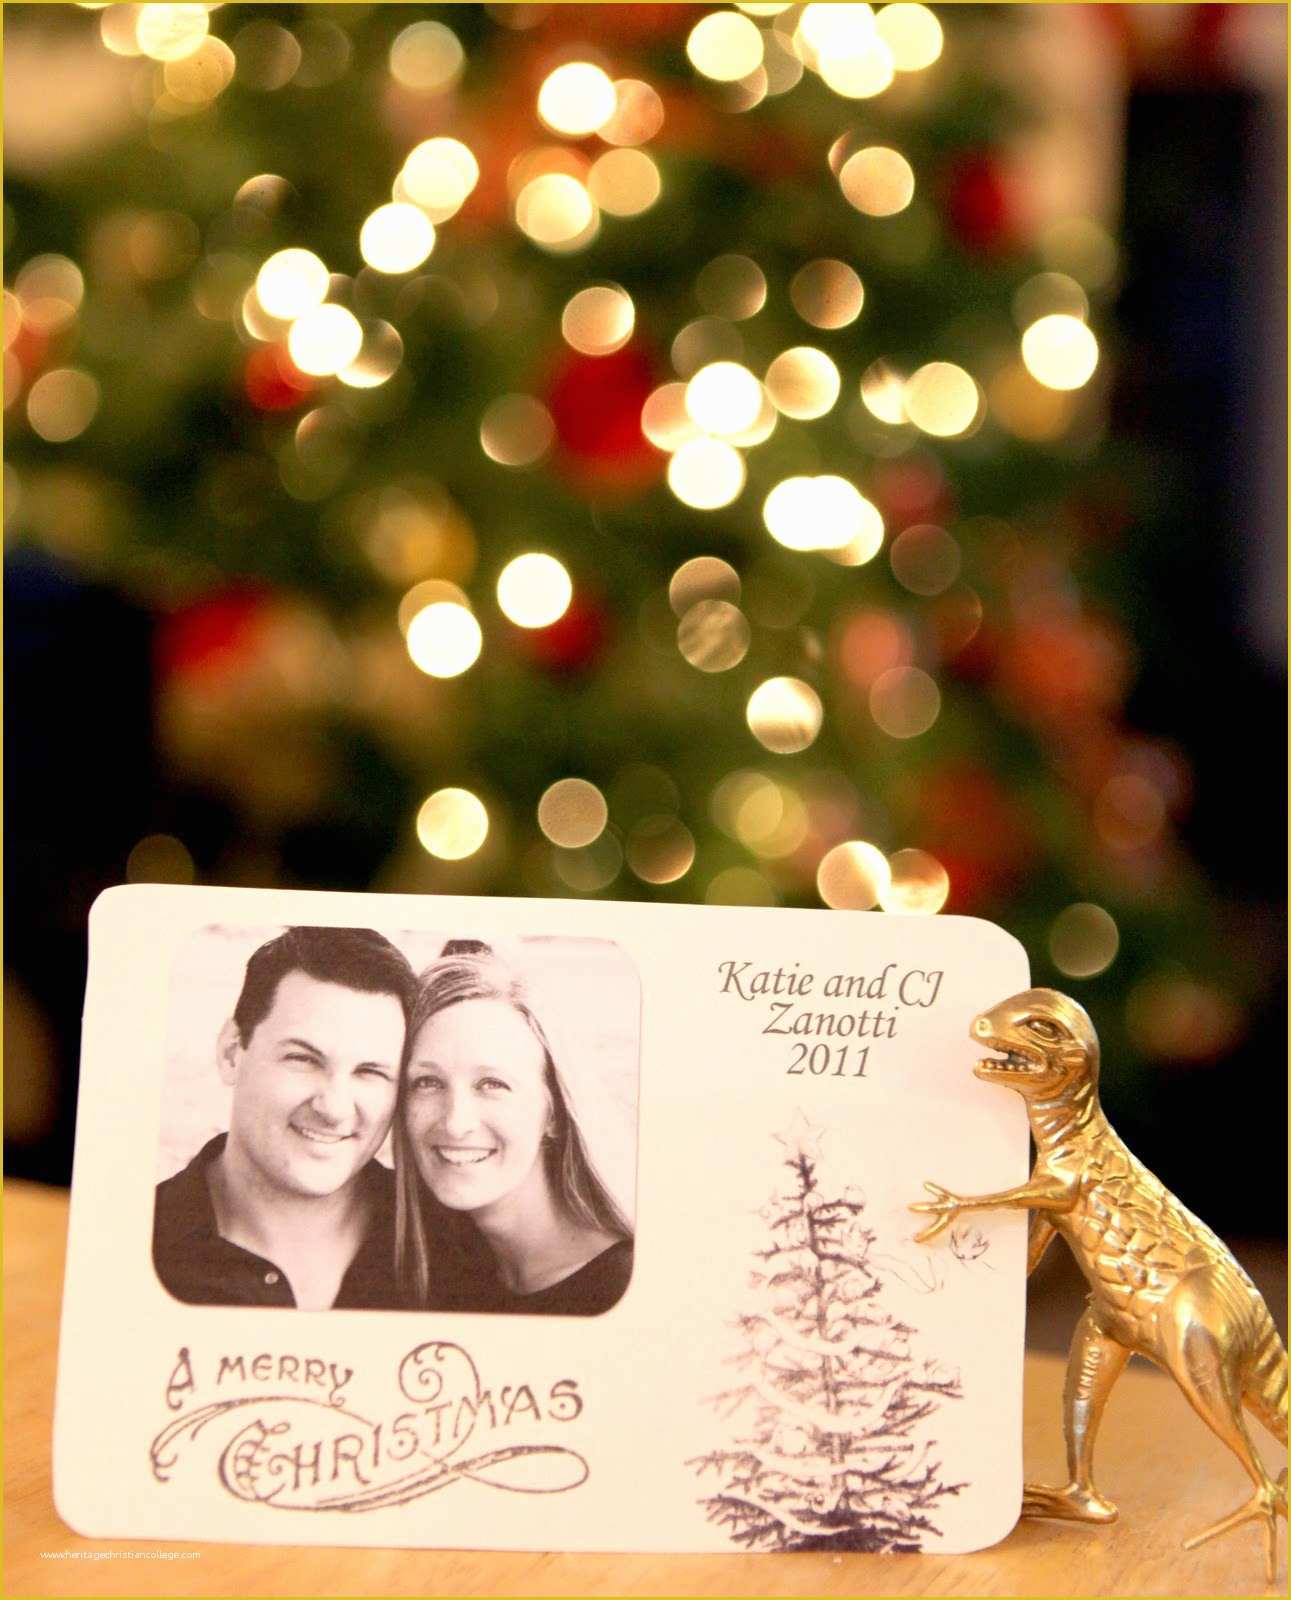 Free Christmas Card Templates for Photographers Of Chloe Moore Graphy the Blog Free Christmas Card